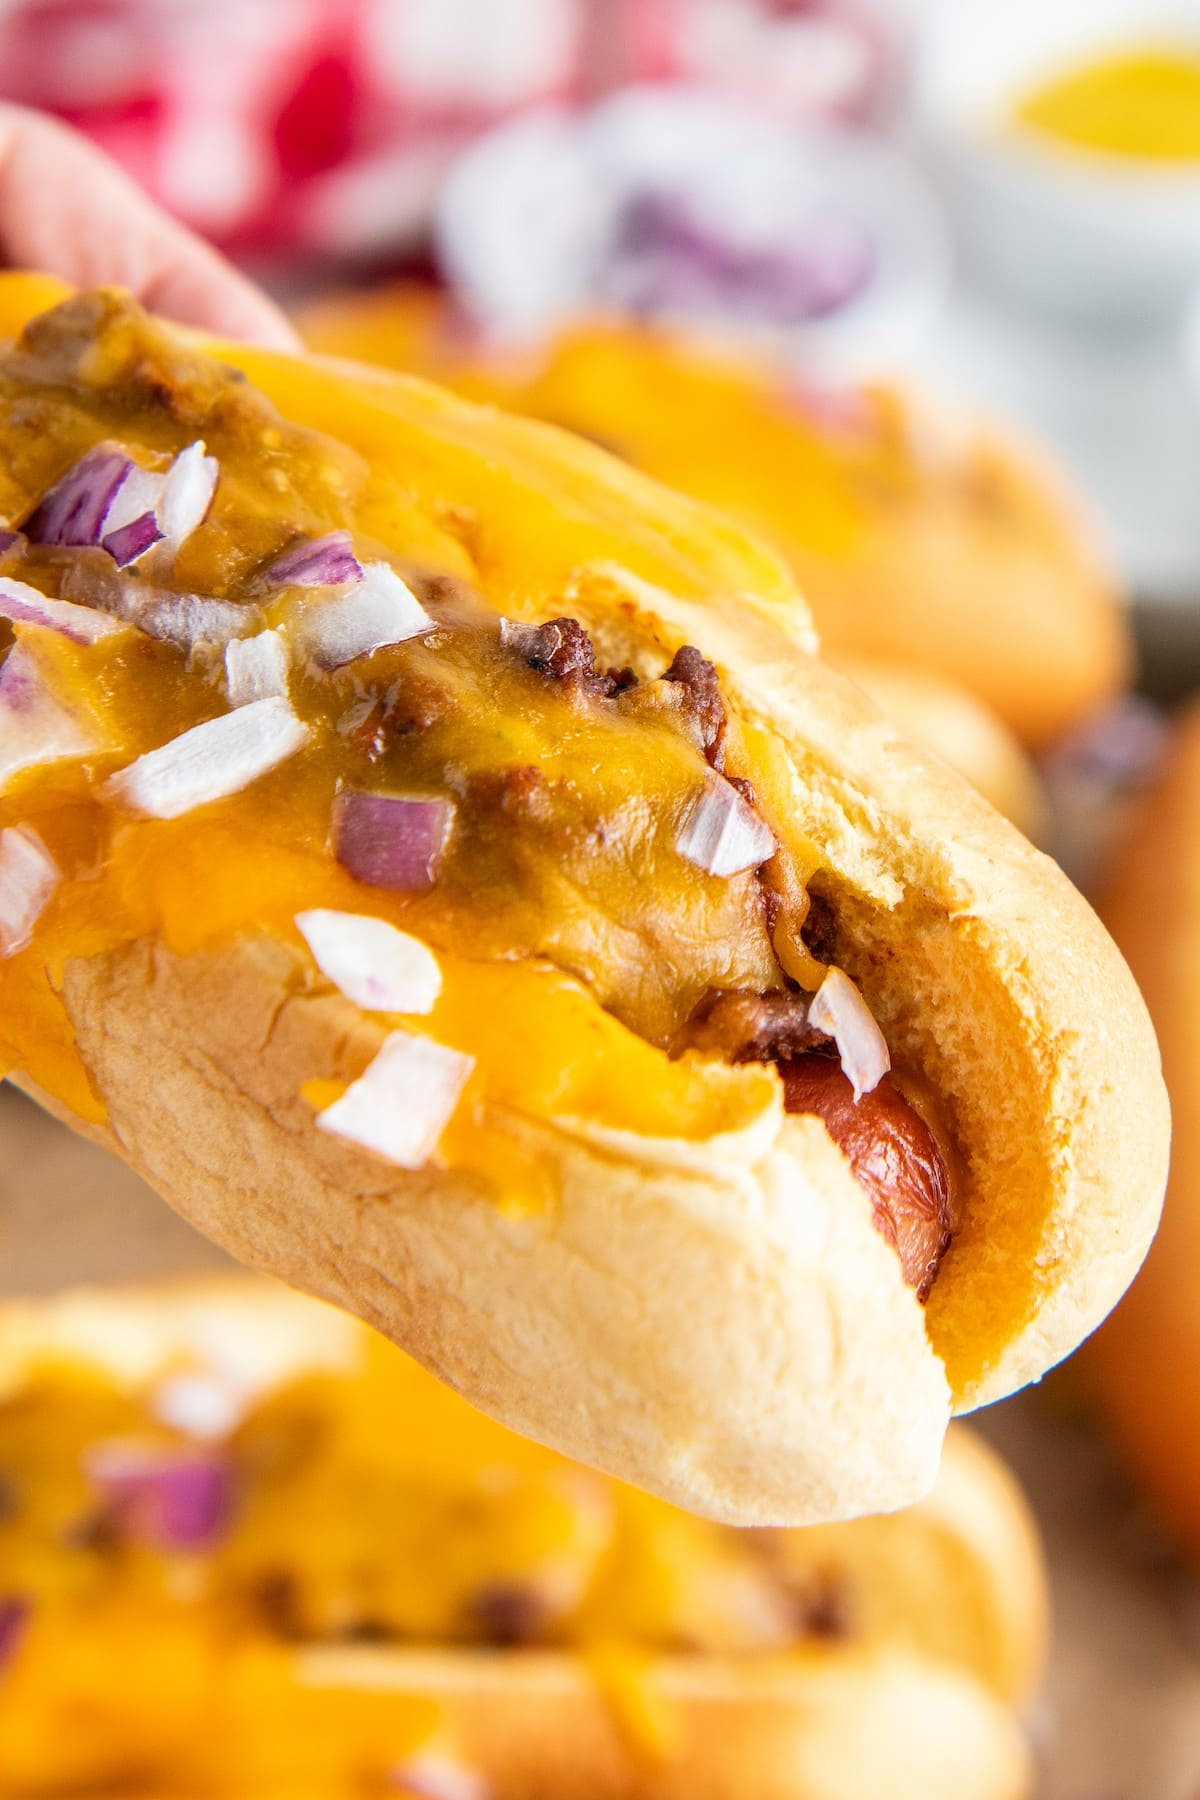 Hot dogs topped with hot dog chili and melted cheese.